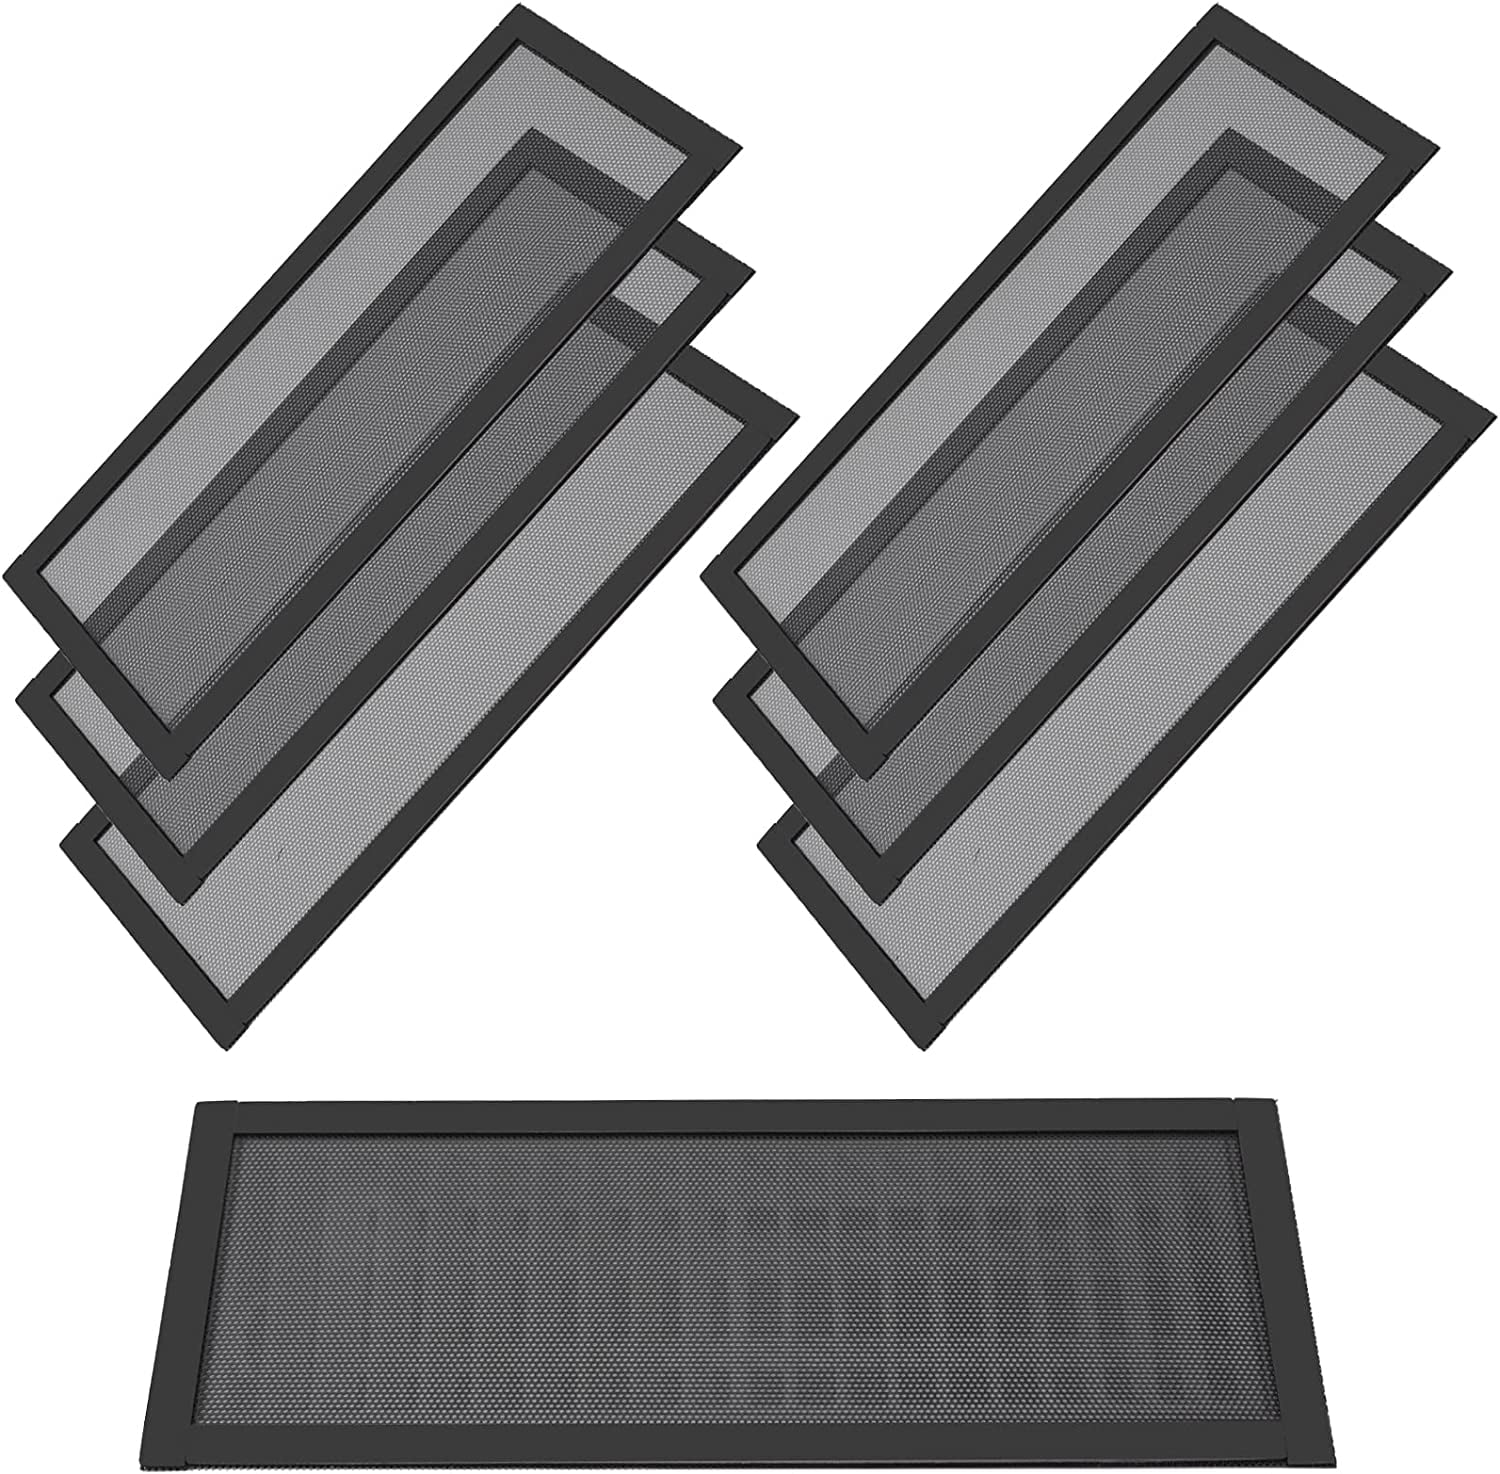 Magnetic Vent Covers 4 X 10(4 Pack), ANTFEES Thick Stronger Magnet Air  Vent Cover for Floor, Wall, Ceiling Vents, Air Registers, RV, Home HVAC and